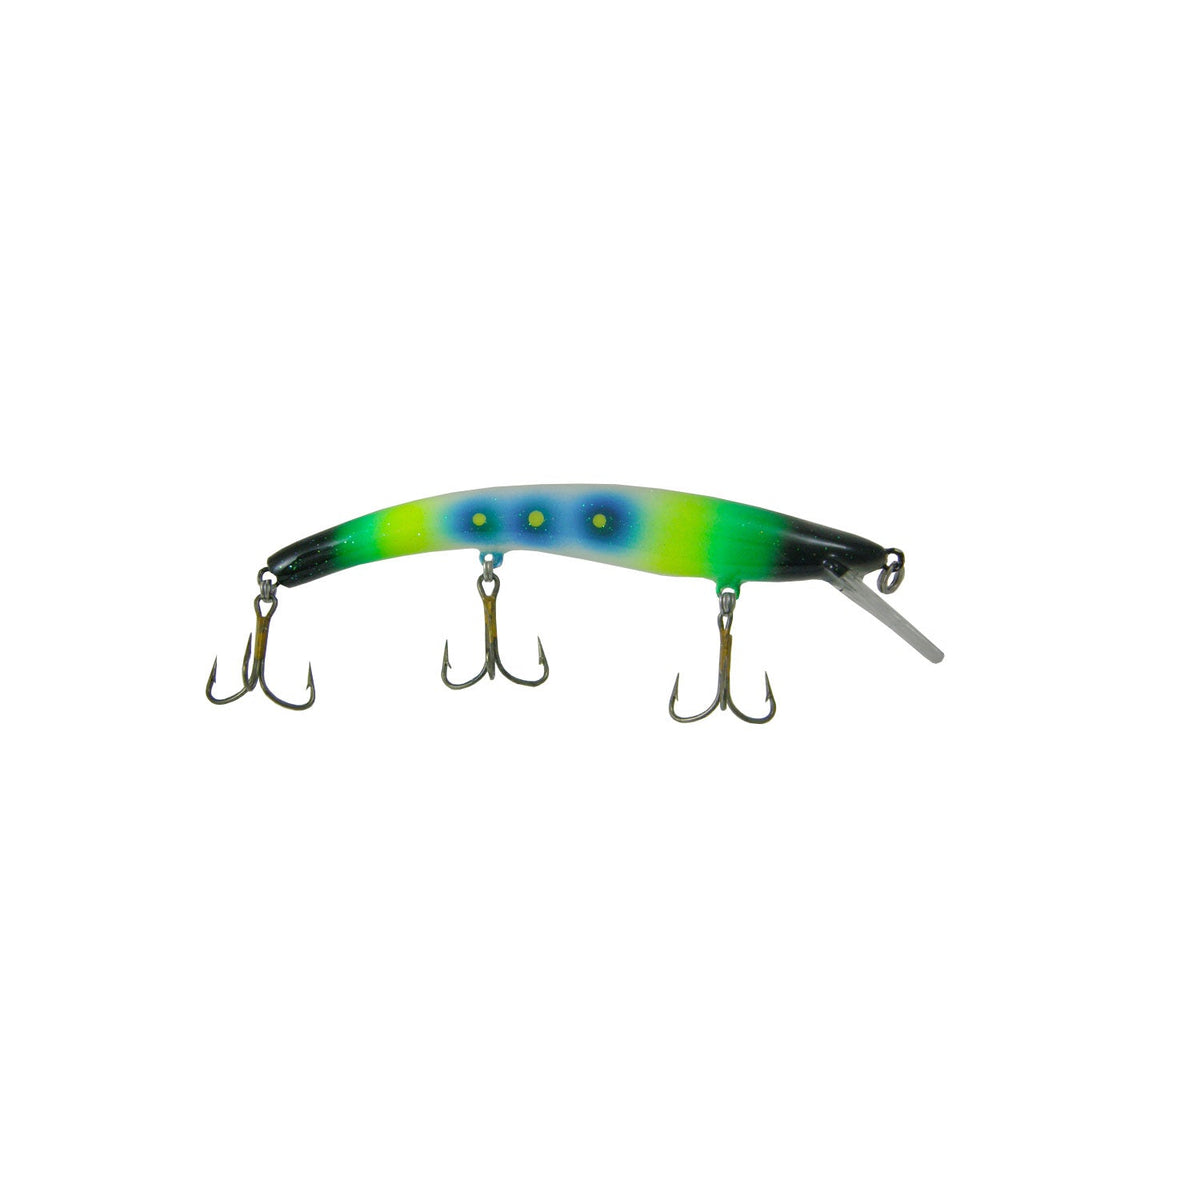 Reef Runner - 700 Series - Ripstick - Clearance Sale - Acme Tackle Company